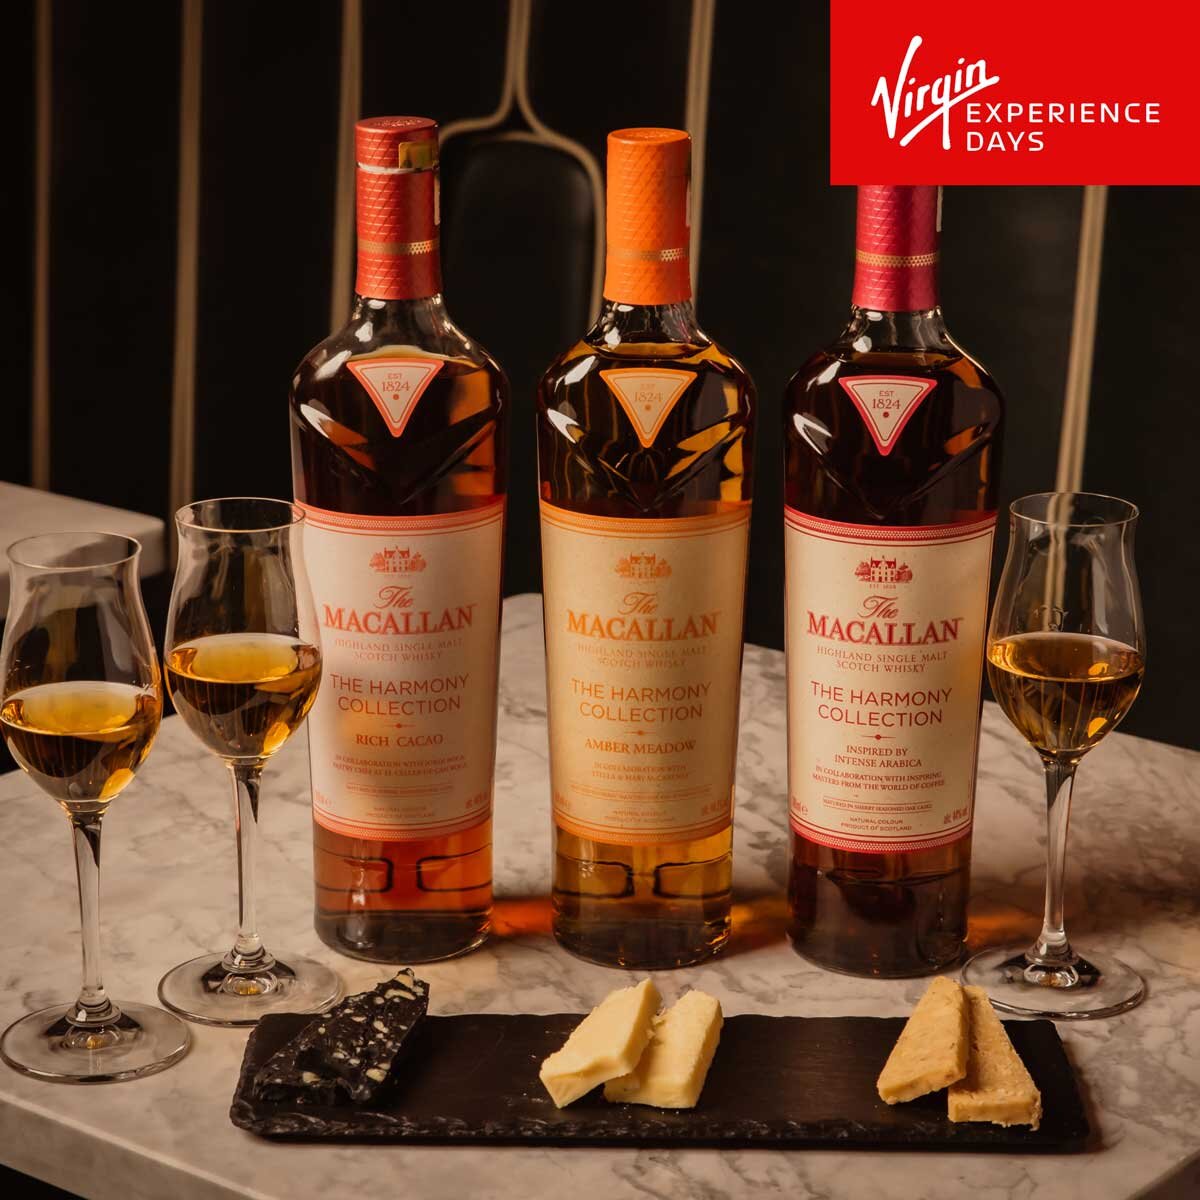 Virgin Experience Days Macallan Harmony Series Whisky Flight, Cheese Pairing and Small Plates for Two